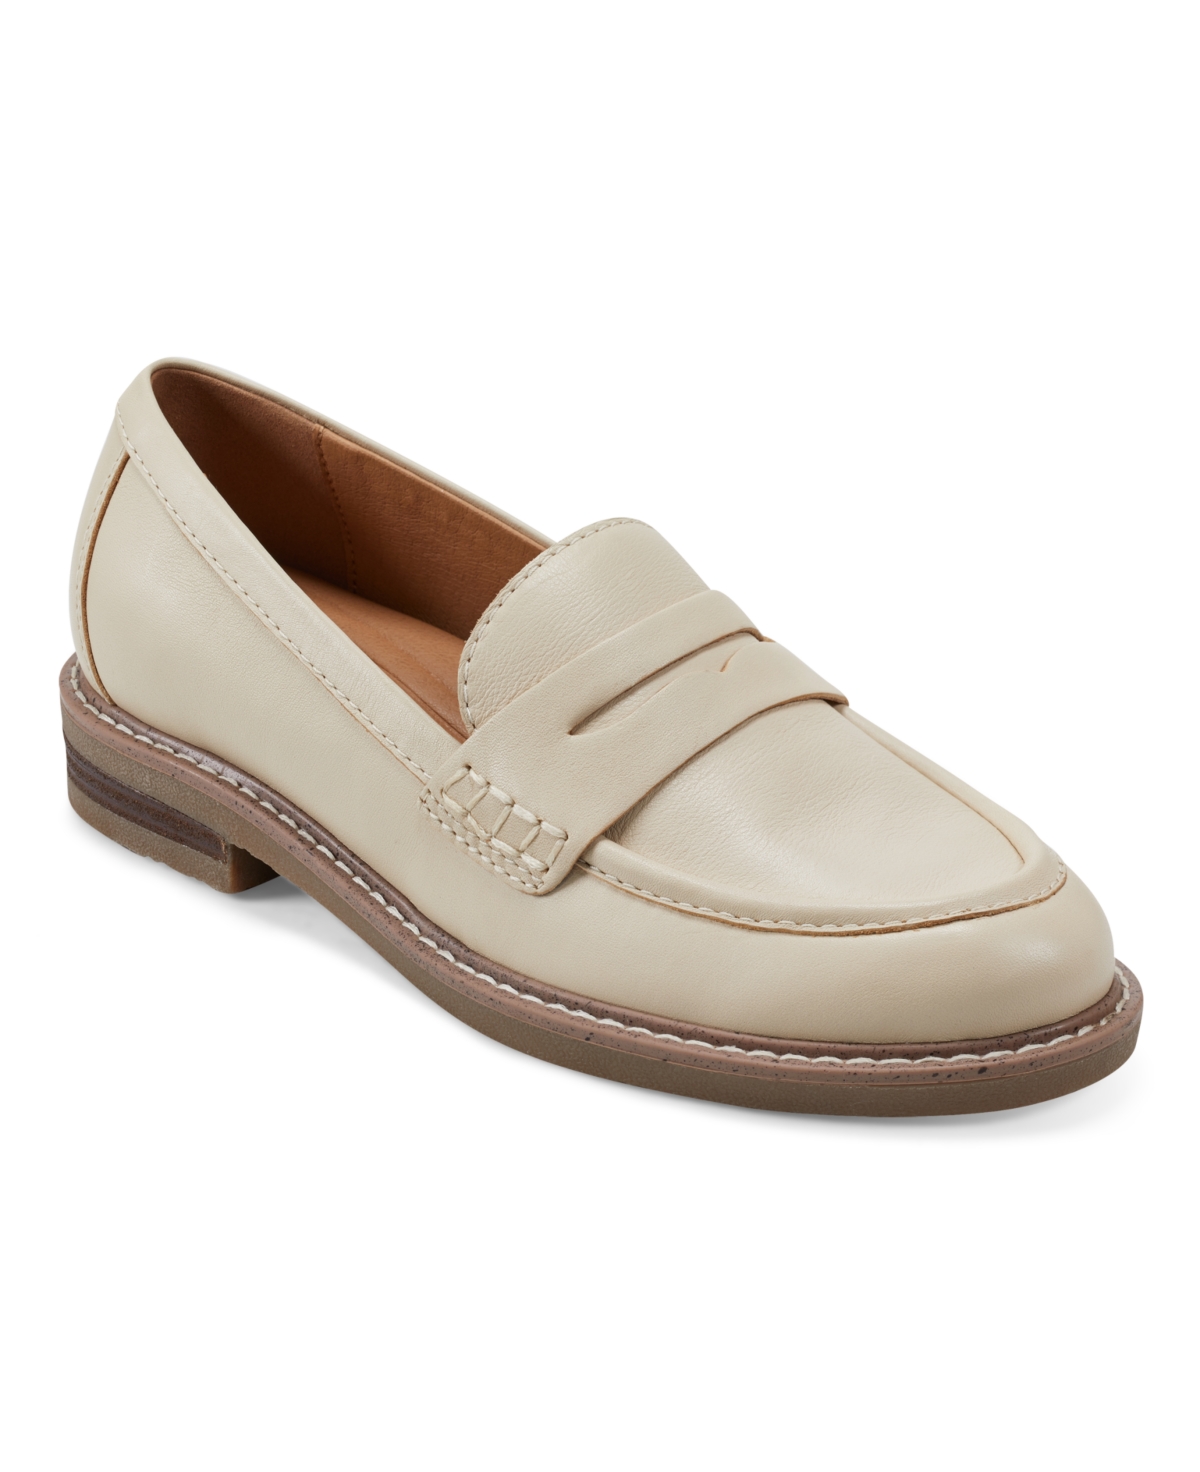 Earth Women's Javas Round Toe Casual Slip-On Penny Loafers - Light Brown Leather